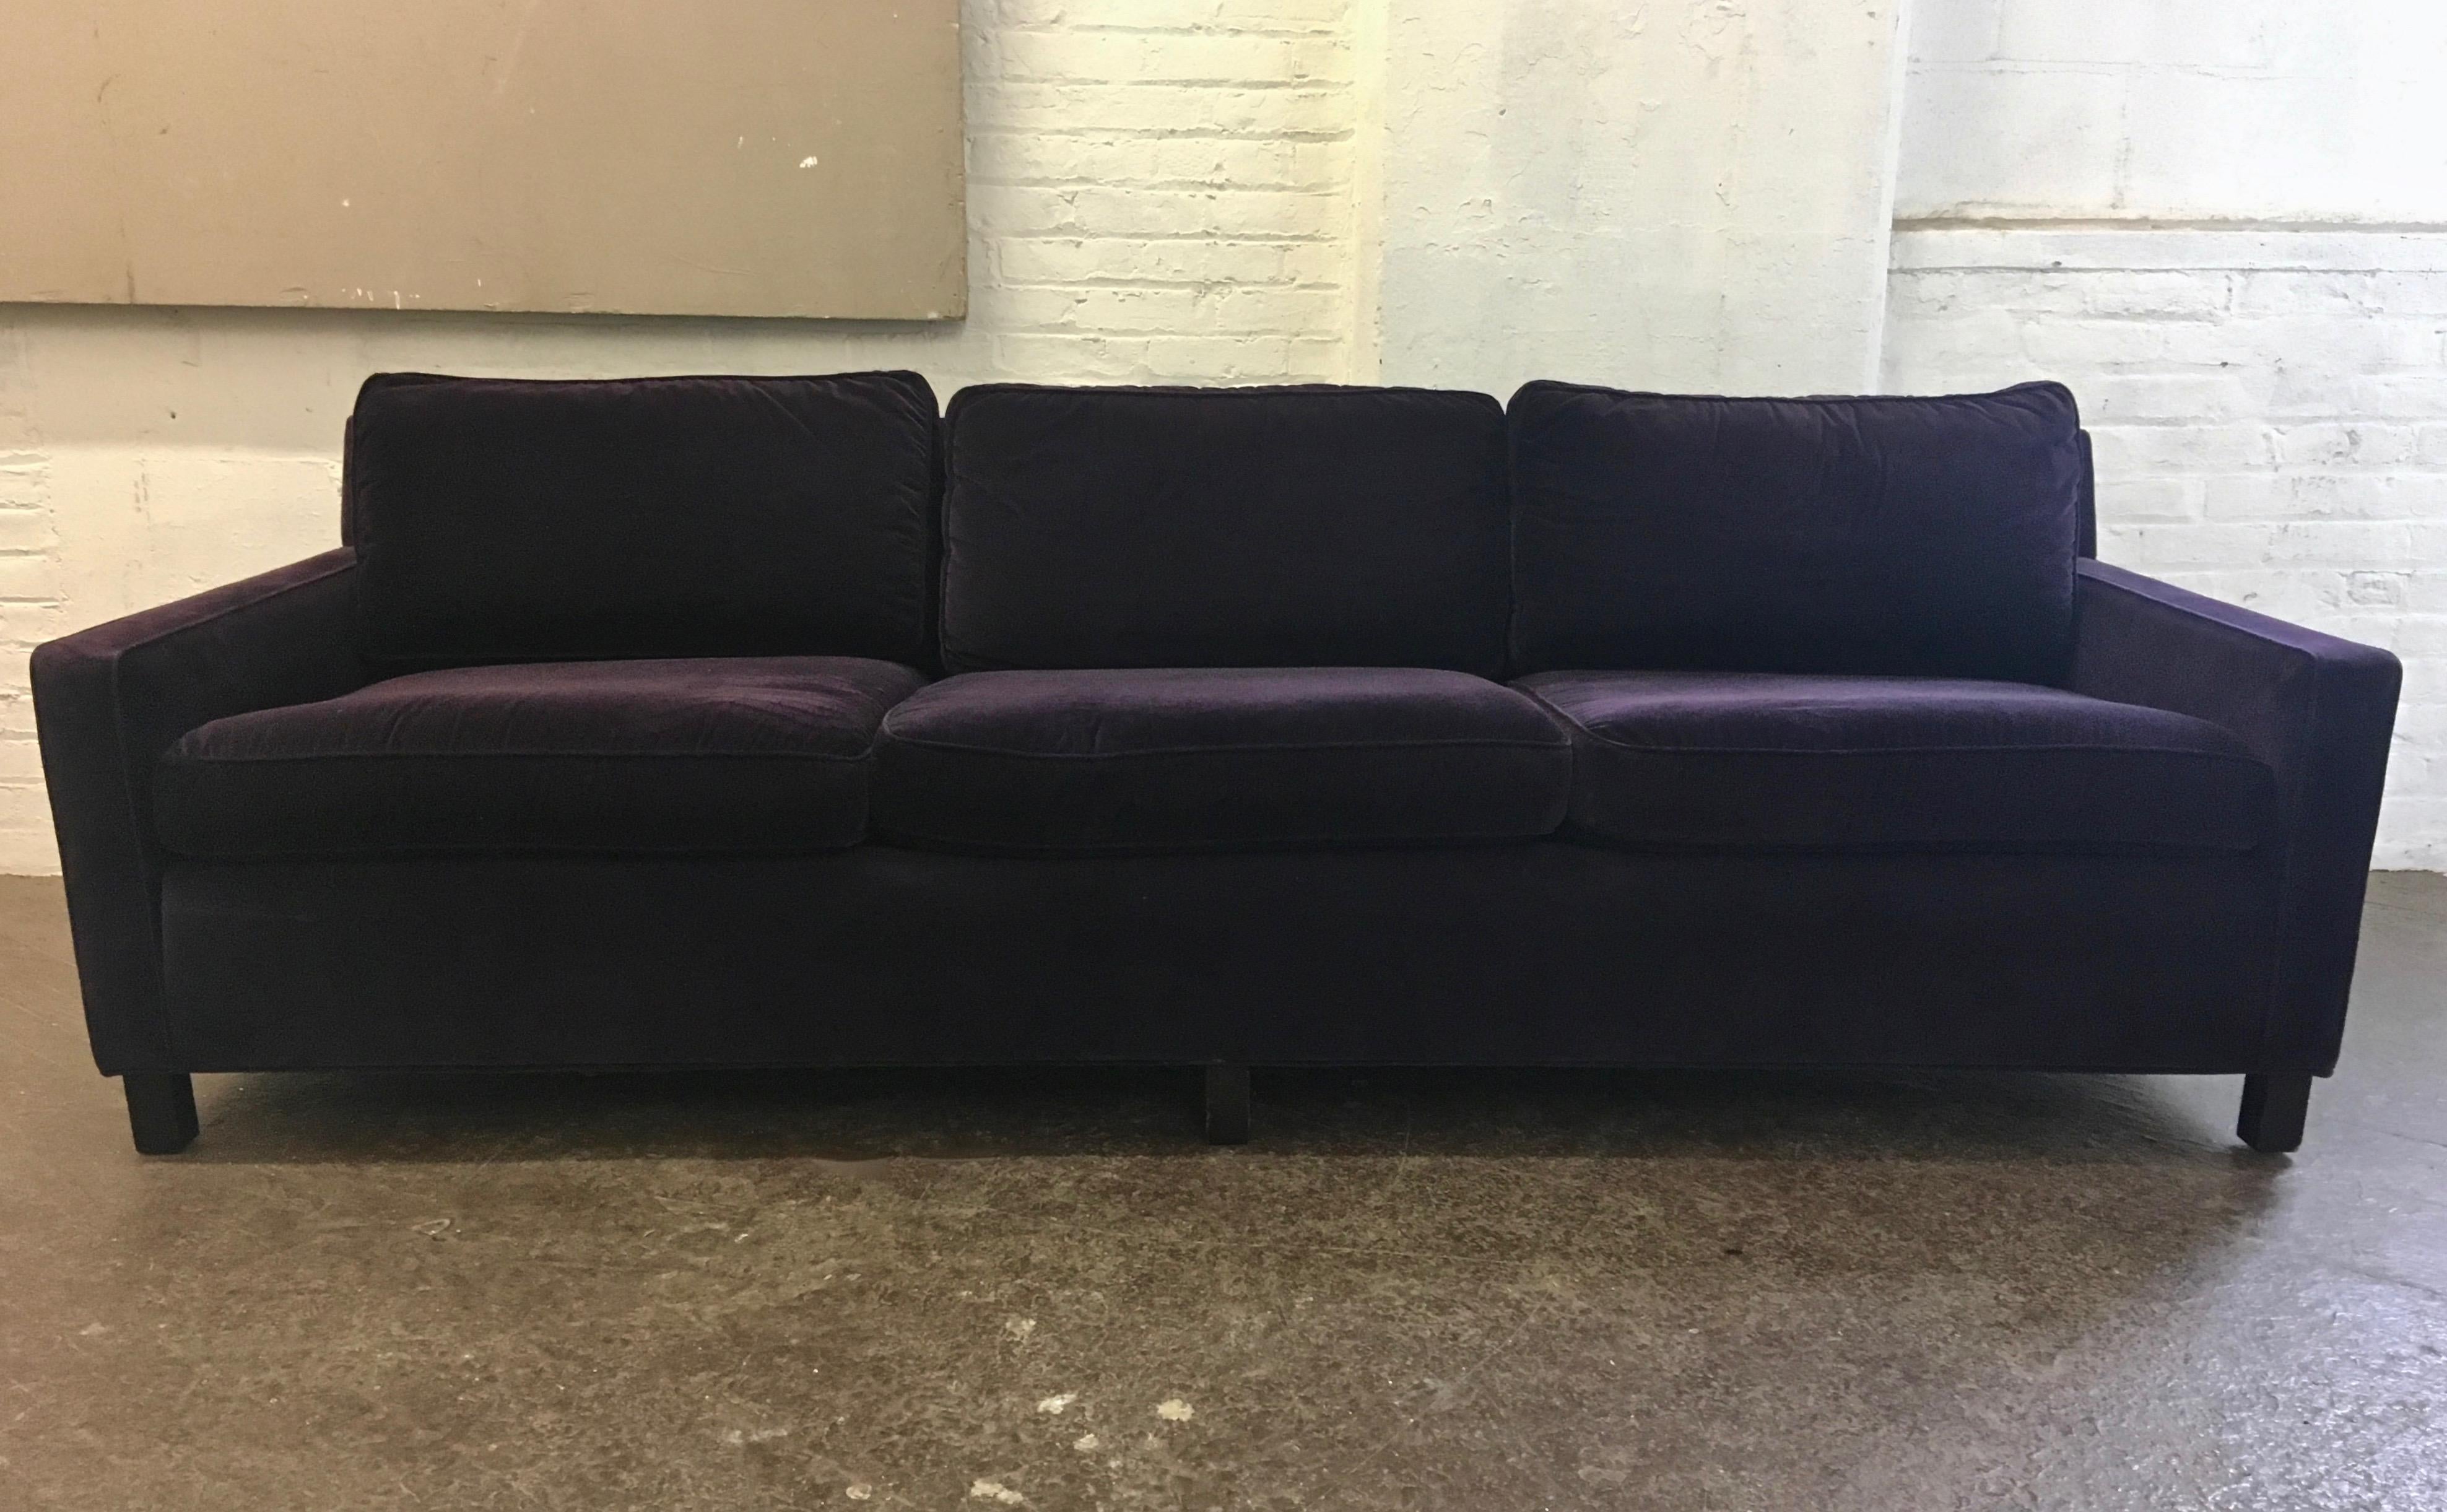 96 inch long Sofa designed by Harvey Probber supported on six solid, stained, wooden legs and upholstered in deep purple/plum velvet. 
Arm height: 22 inches